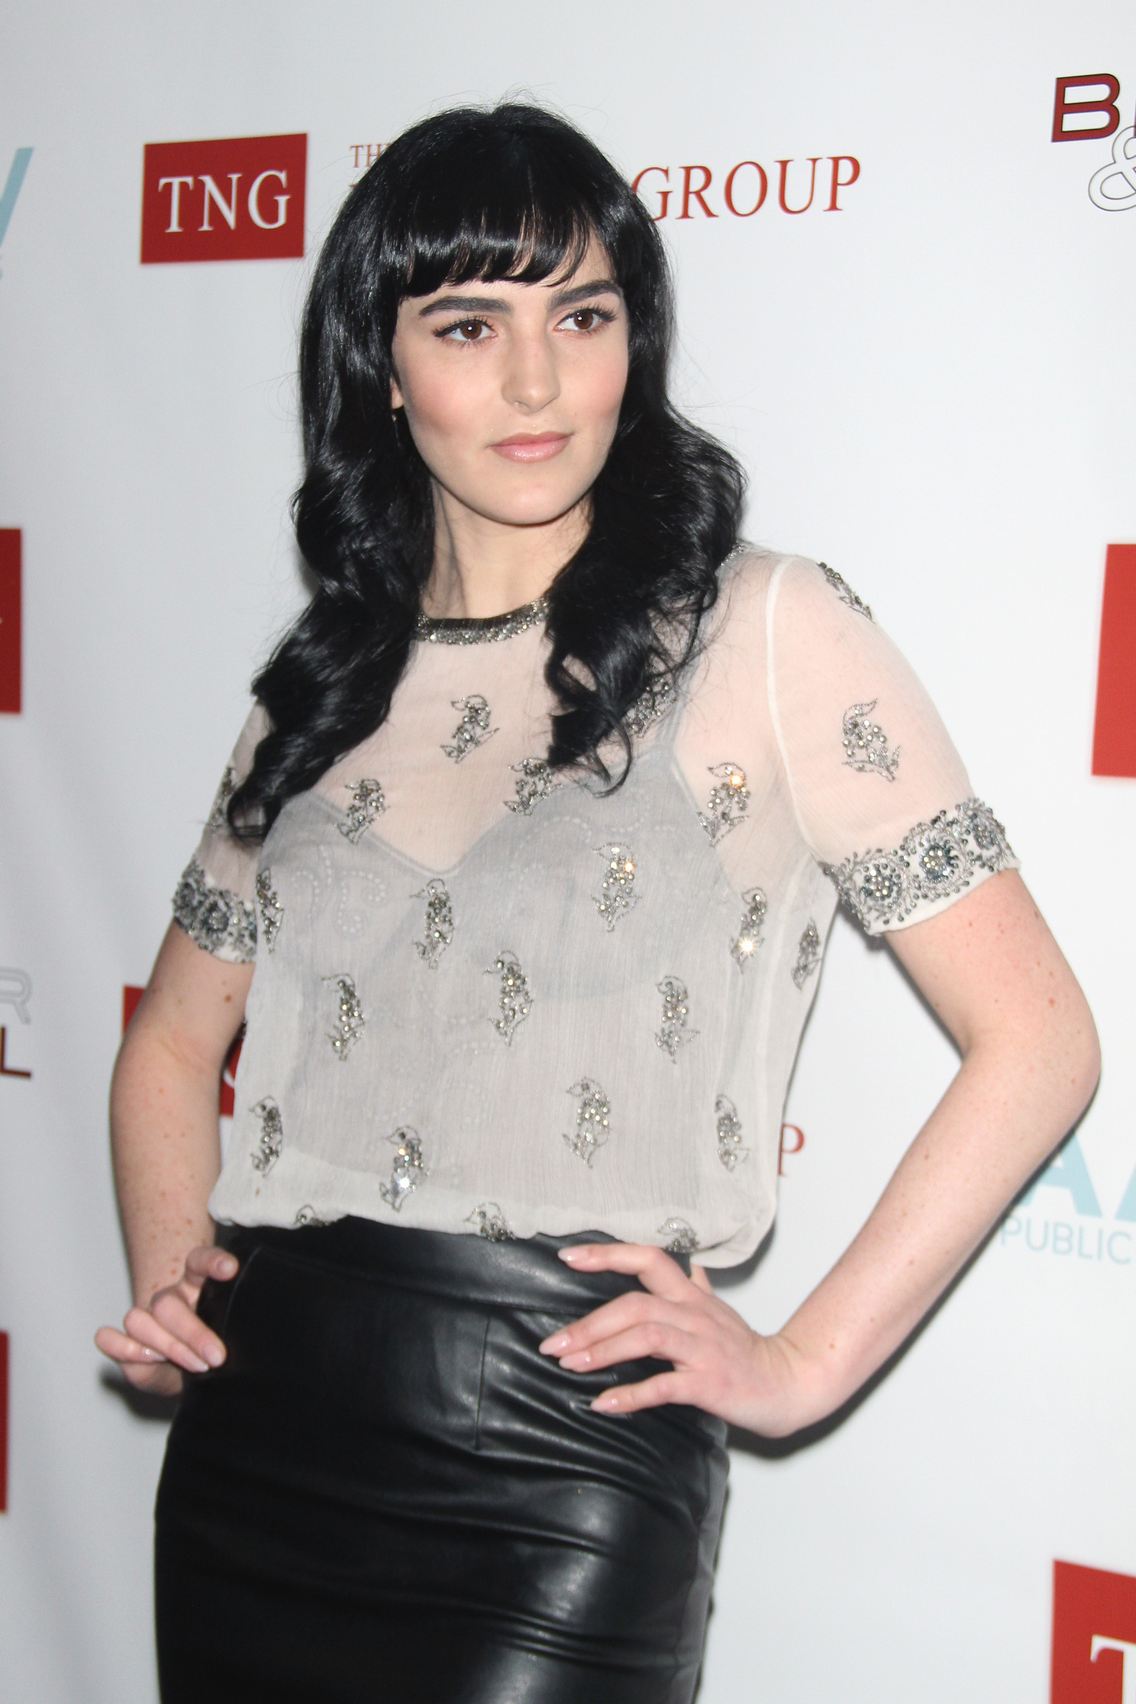 Ali Lohan hit the red carpet at the TNG Holiday Launch Celebration